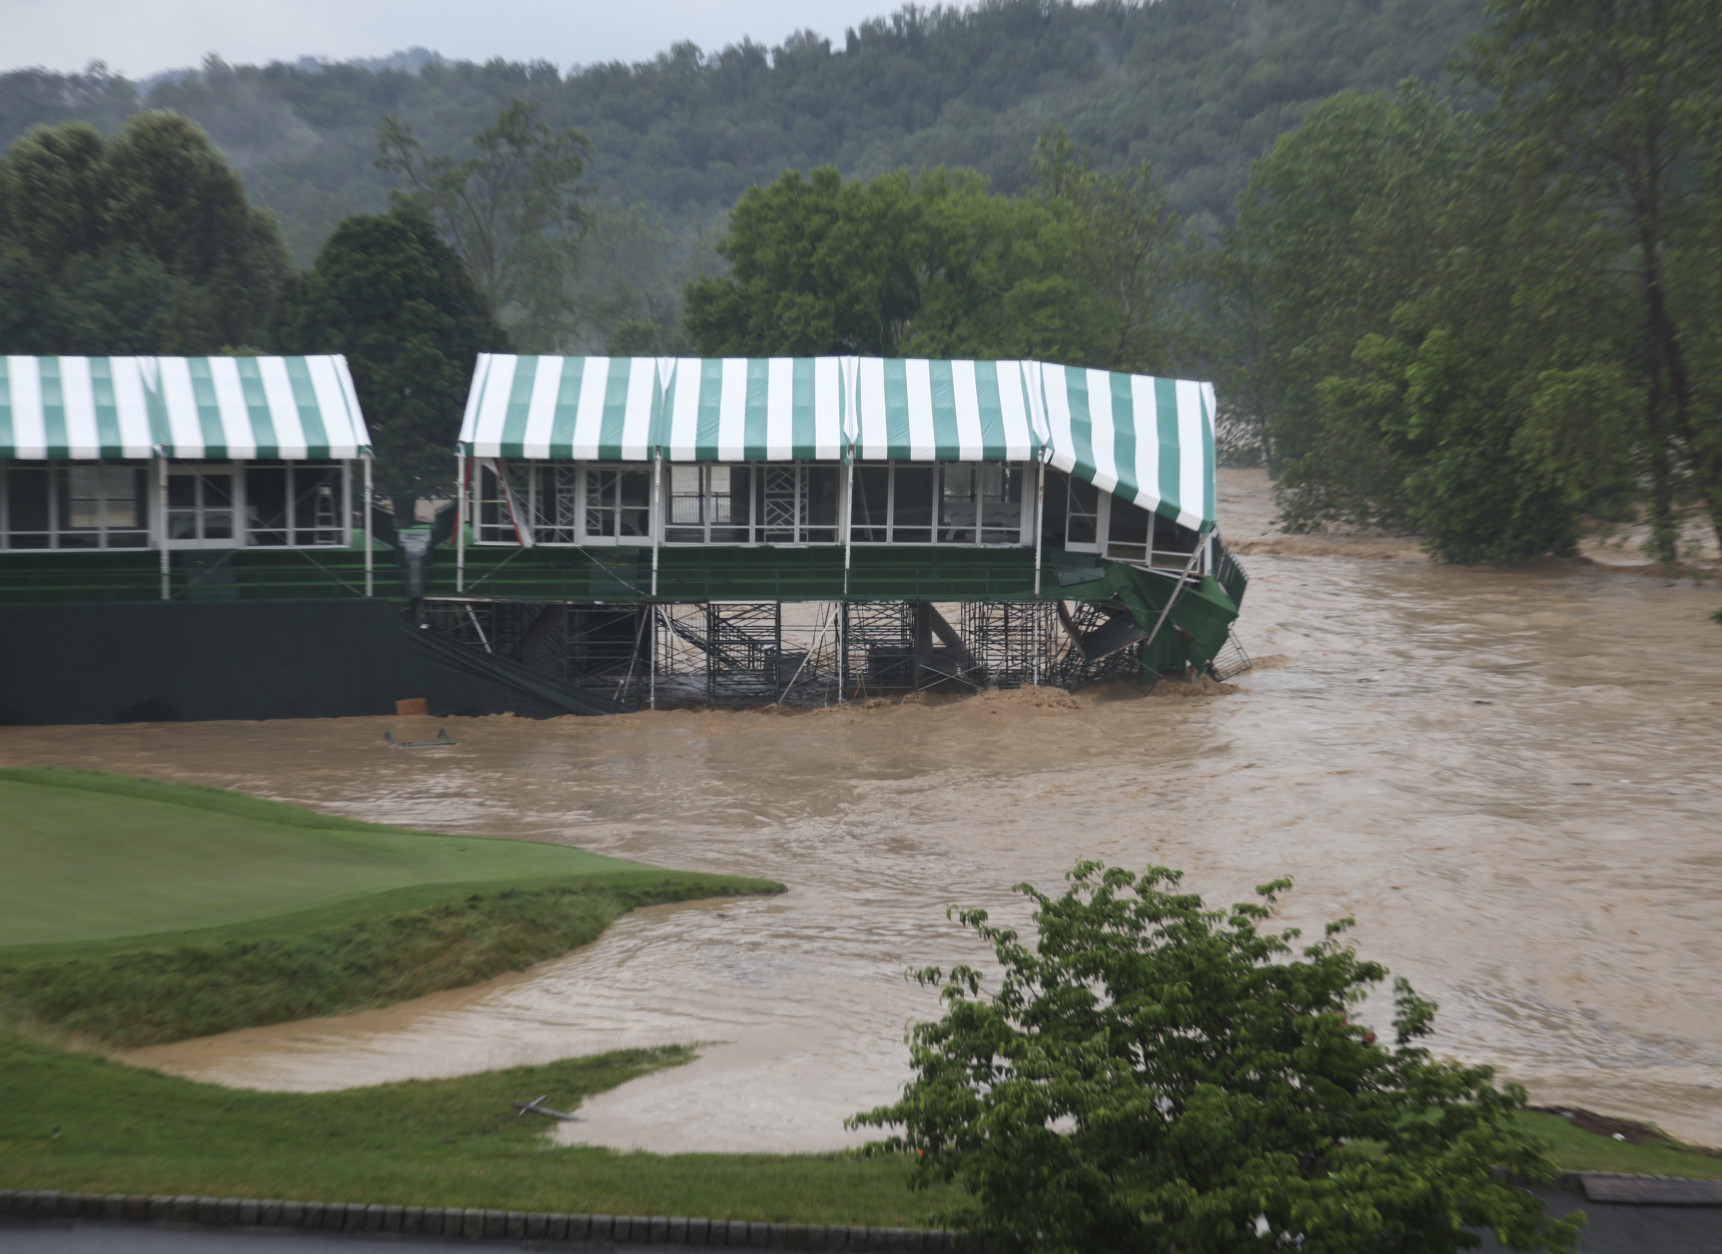 This Thursday June 23, 2016 image provided by the Greenbrier shows flooding on the 18th green of the Old White Course at the Greenbrier in White Sulphur Springs, W. Va. Severe flooding hit the area that is scheduled to host a PGA tour event in two weeks. (Cam Huffman/The Greenbrier via AP)